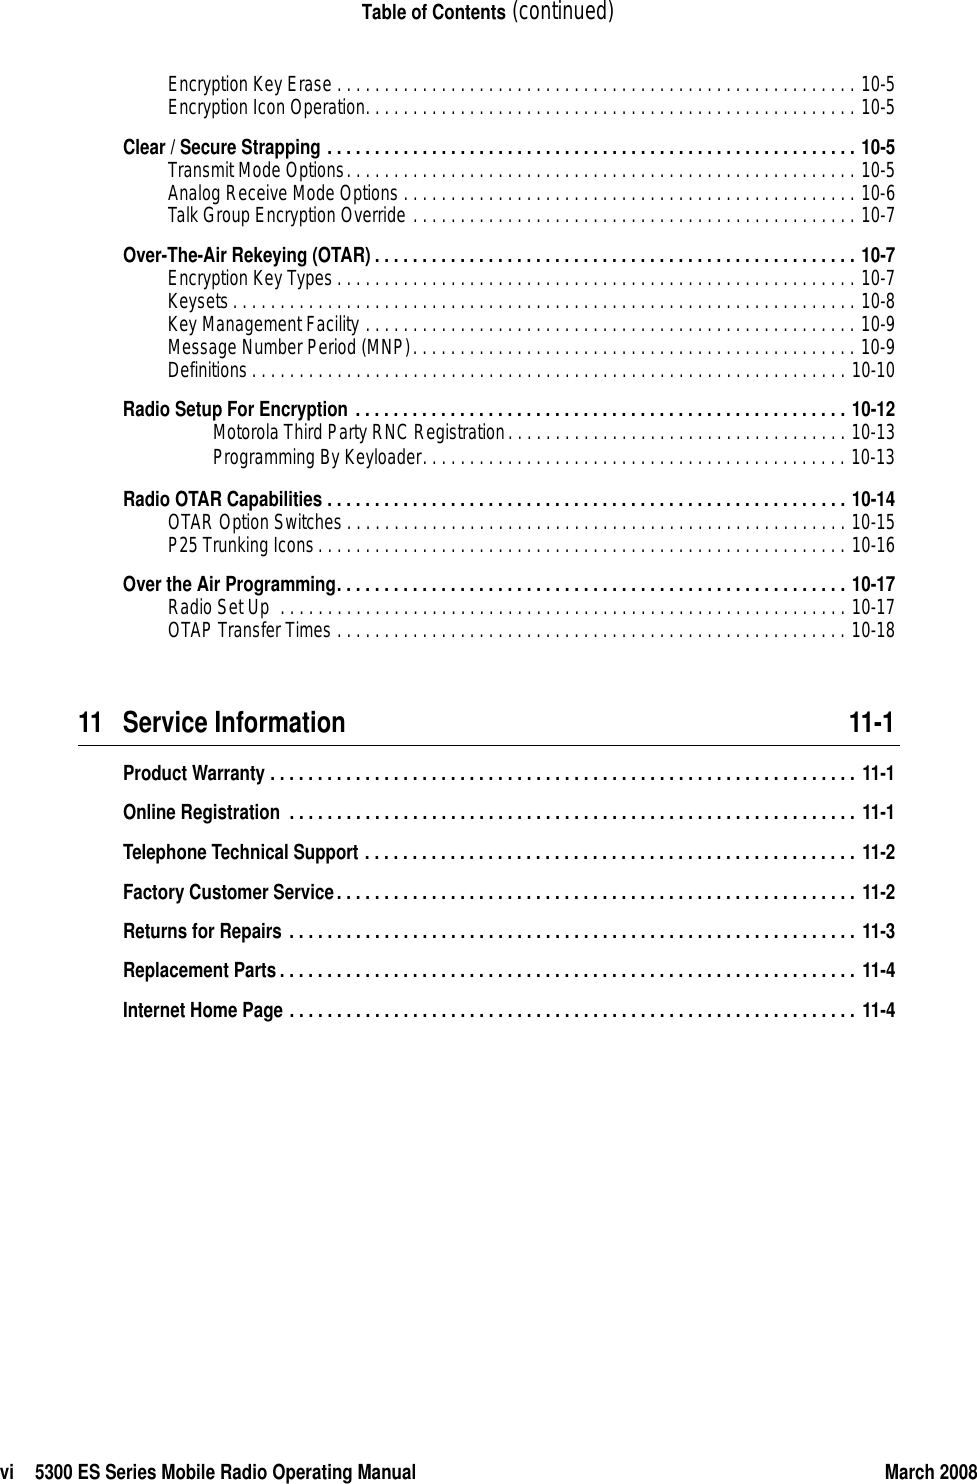 vi 5300 ES Series Mobile Radio Operating Manual March 2008Table of Contents (continued)Encryption Key Erase . . . . . . . . . . . . . . . . . . . . . . . . . . . . . . . . . . . . . . . . . . . . . . . . . . . . . . . 10-5Encryption Icon Operation. . . . . . . . . . . . . . . . . . . . . . . . . . . . . . . . . . . . . . . . . . . . . . . . . . . . 10-5Clear / Secure Strapping . . . . . . . . . . . . . . . . . . . . . . . . . . . . . . . . . . . . . . . . . . . . . . . . . . . . . . . . 10-5Transmit Mode Options. . . . . . . . . . . . . . . . . . . . . . . . . . . . . . . . . . . . . . . . . . . . . . . . . . . . . . 10-5Analog Receive Mode Options . . . . . . . . . . . . . . . . . . . . . . . . . . . . . . . . . . . . . . . . . . . . . . . . 10-6Talk Group Encryption Override . . . . . . . . . . . . . . . . . . . . . . . . . . . . . . . . . . . . . . . . . . . . . . . 10-7Over-The-Air Rekeying (OTAR) . . . . . . . . . . . . . . . . . . . . . . . . . . . . . . . . . . . . . . . . . . . . . . . . . . . 10-7Encryption Key Types . . . . . . . . . . . . . . . . . . . . . . . . . . . . . . . . . . . . . . . . . . . . . . . . . . . . . . . 10-7Keysets. . . . . . . . . . . . . . . . . . . . . . . . . . . . . . . . . . . . . . . . . . . . . . . . . . . . . . . . . . . . . . . . . . 10-8Key Management Facility . . . . . . . . . . . . . . . . . . . . . . . . . . . . . . . . . . . . . . . . . . . . . . . . . . . . 10-9Message Number Period (MNP). . . . . . . . . . . . . . . . . . . . . . . . . . . . . . . . . . . . . . . . . . . . . . . 10-9Definitions. . . . . . . . . . . . . . . . . . . . . . . . . . . . . . . . . . . . . . . . . . . . . . . . . . . . . . . . . . . . . . . 10-10Radio Setup For Encryption . . . . . . . . . . . . . . . . . . . . . . . . . . . . . . . . . . . . . . . . . . . . . . . . . . . . 10-12Motorola Third Party RNC Registration. . . . . . . . . . . . . . . . . . . . . . . . . . . . . . . . . . . . 10-13Programming By Keyloader. . . . . . . . . . . . . . . . . . . . . . . . . . . . . . . . . . . . . . . . . . . . . 10-13Radio OTAR Capabilities . . . . . . . . . . . . . . . . . . . . . . . . . . . . . . . . . . . . . . . . . . . . . . . . . . . . . . . 10-14OTAR Option Switches . . . . . . . . . . . . . . . . . . . . . . . . . . . . . . . . . . . . . . . . . . . . . . . . . . . . . 10-15P25 Trunking Icons. . . . . . . . . . . . . . . . . . . . . . . . . . . . . . . . . . . . . . . . . . . . . . . . . . . . . . . . 10-16Over the Air Programming. . . . . . . . . . . . . . . . . . . . . . . . . . . . . . . . . . . . . . . . . . . . . . . . . . . . . . 10-17Radio Set Up  . . . . . . . . . . . . . . . . . . . . . . . . . . . . . . . . . . . . . . . . . . . . . . . . . . . . . . . . . . . . 10-17OTAP Transfer Times . . . . . . . . . . . . . . . . . . . . . . . . . . . . . . . . . . . . . . . . . . . . . . . . . . . . . . 10-1811 Service Information 11-1Product Warranty . . . . . . . . . . . . . . . . . . . . . . . . . . . . . . . . . . . . . . . . . . . . . . . . . . . . . . . . . . . . . . 11-1Online Registration  . . . . . . . . . . . . . . . . . . . . . . . . . . . . . . . . . . . . . . . . . . . . . . . . . . . . . . . . . . . . 11-1Telephone Technical Support . . . . . . . . . . . . . . . . . . . . . . . . . . . . . . . . . . . . . . . . . . . . . . . . . . . . 11-2Factory Customer Service. . . . . . . . . . . . . . . . . . . . . . . . . . . . . . . . . . . . . . . . . . . . . . . . . . . . . . . 11-2Returns for Repairs . . . . . . . . . . . . . . . . . . . . . . . . . . . . . . . . . . . . . . . . . . . . . . . . . . . . . . . . . . . . 11-3Replacement Parts. . . . . . . . . . . . . . . . . . . . . . . . . . . . . . . . . . . . . . . . . . . . . . . . . . . . . . . . . . . . . 11-4Internet Home Page . . . . . . . . . . . . . . . . . . . . . . . . . . . . . . . . . . . . . . . . . . . . . . . . . . . . . . . . . . . . 11-4